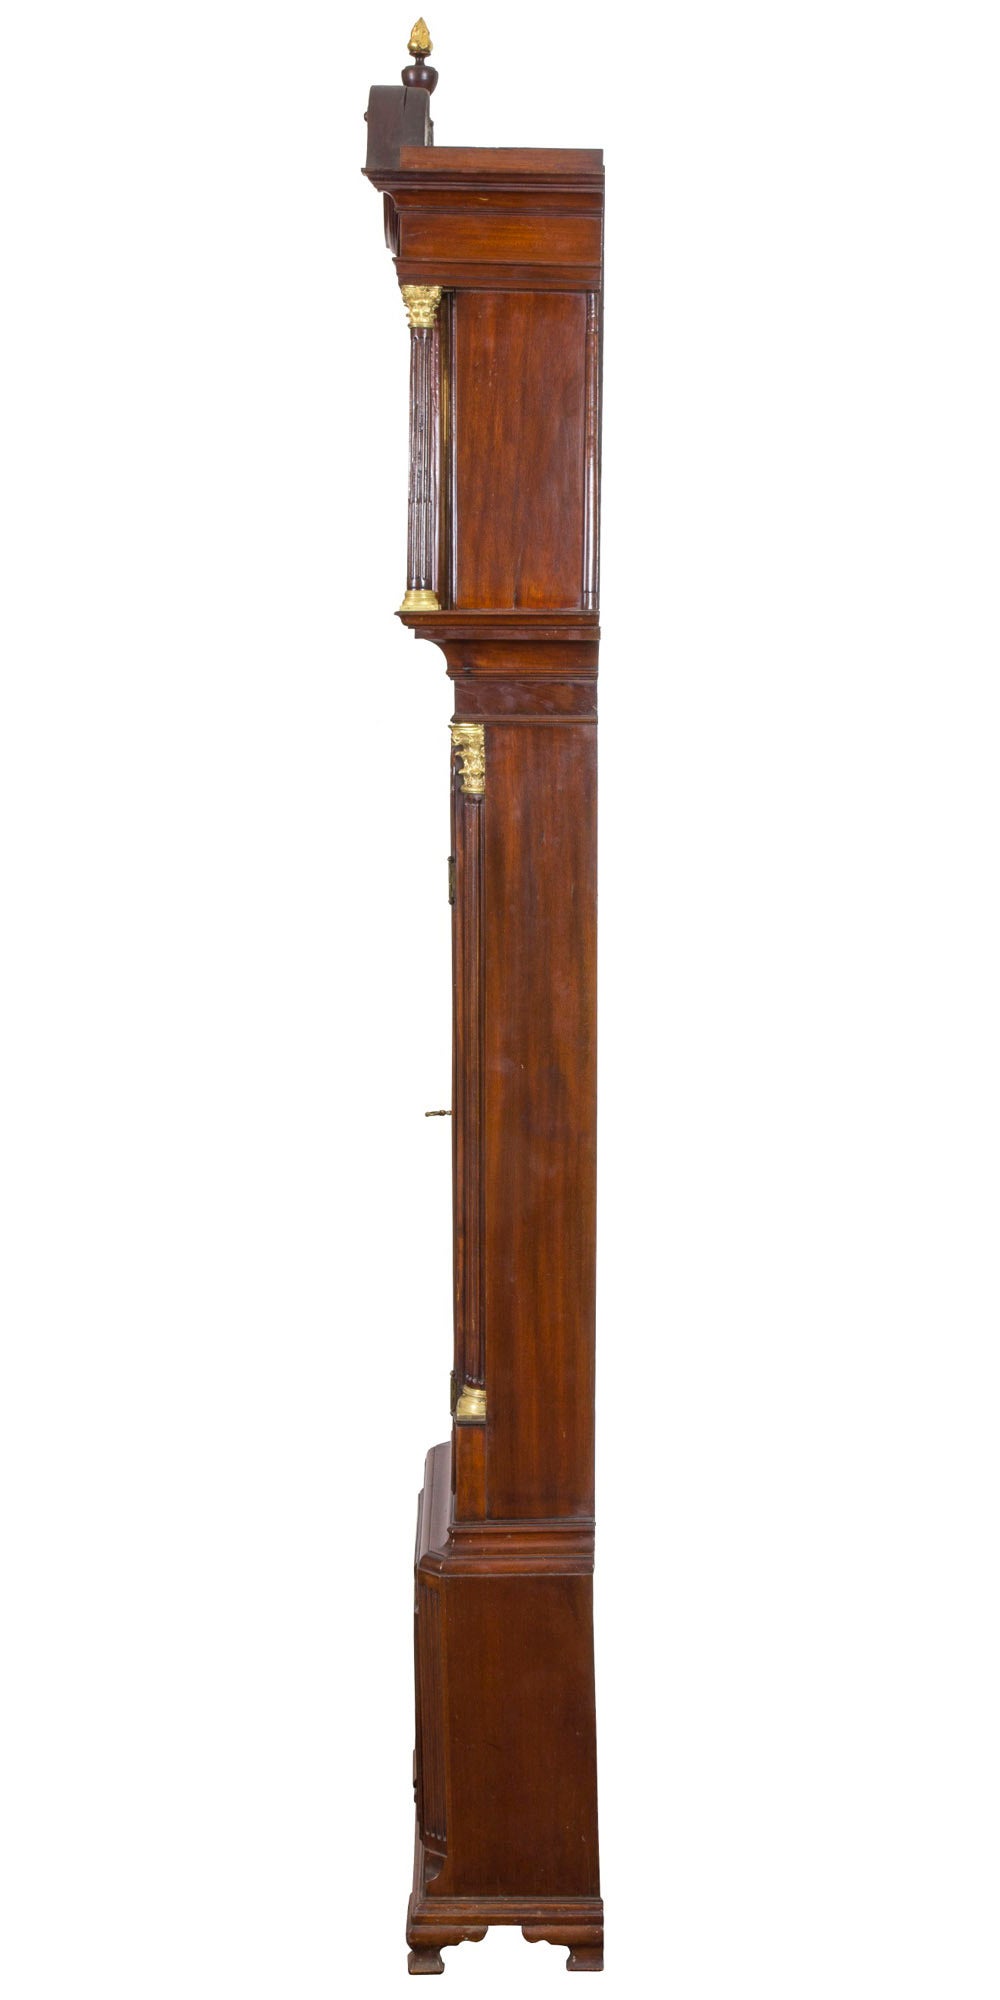 Late 18th Century Mahogany Chippendale Clock with Silvered Face by James Jacks, New York For Sale